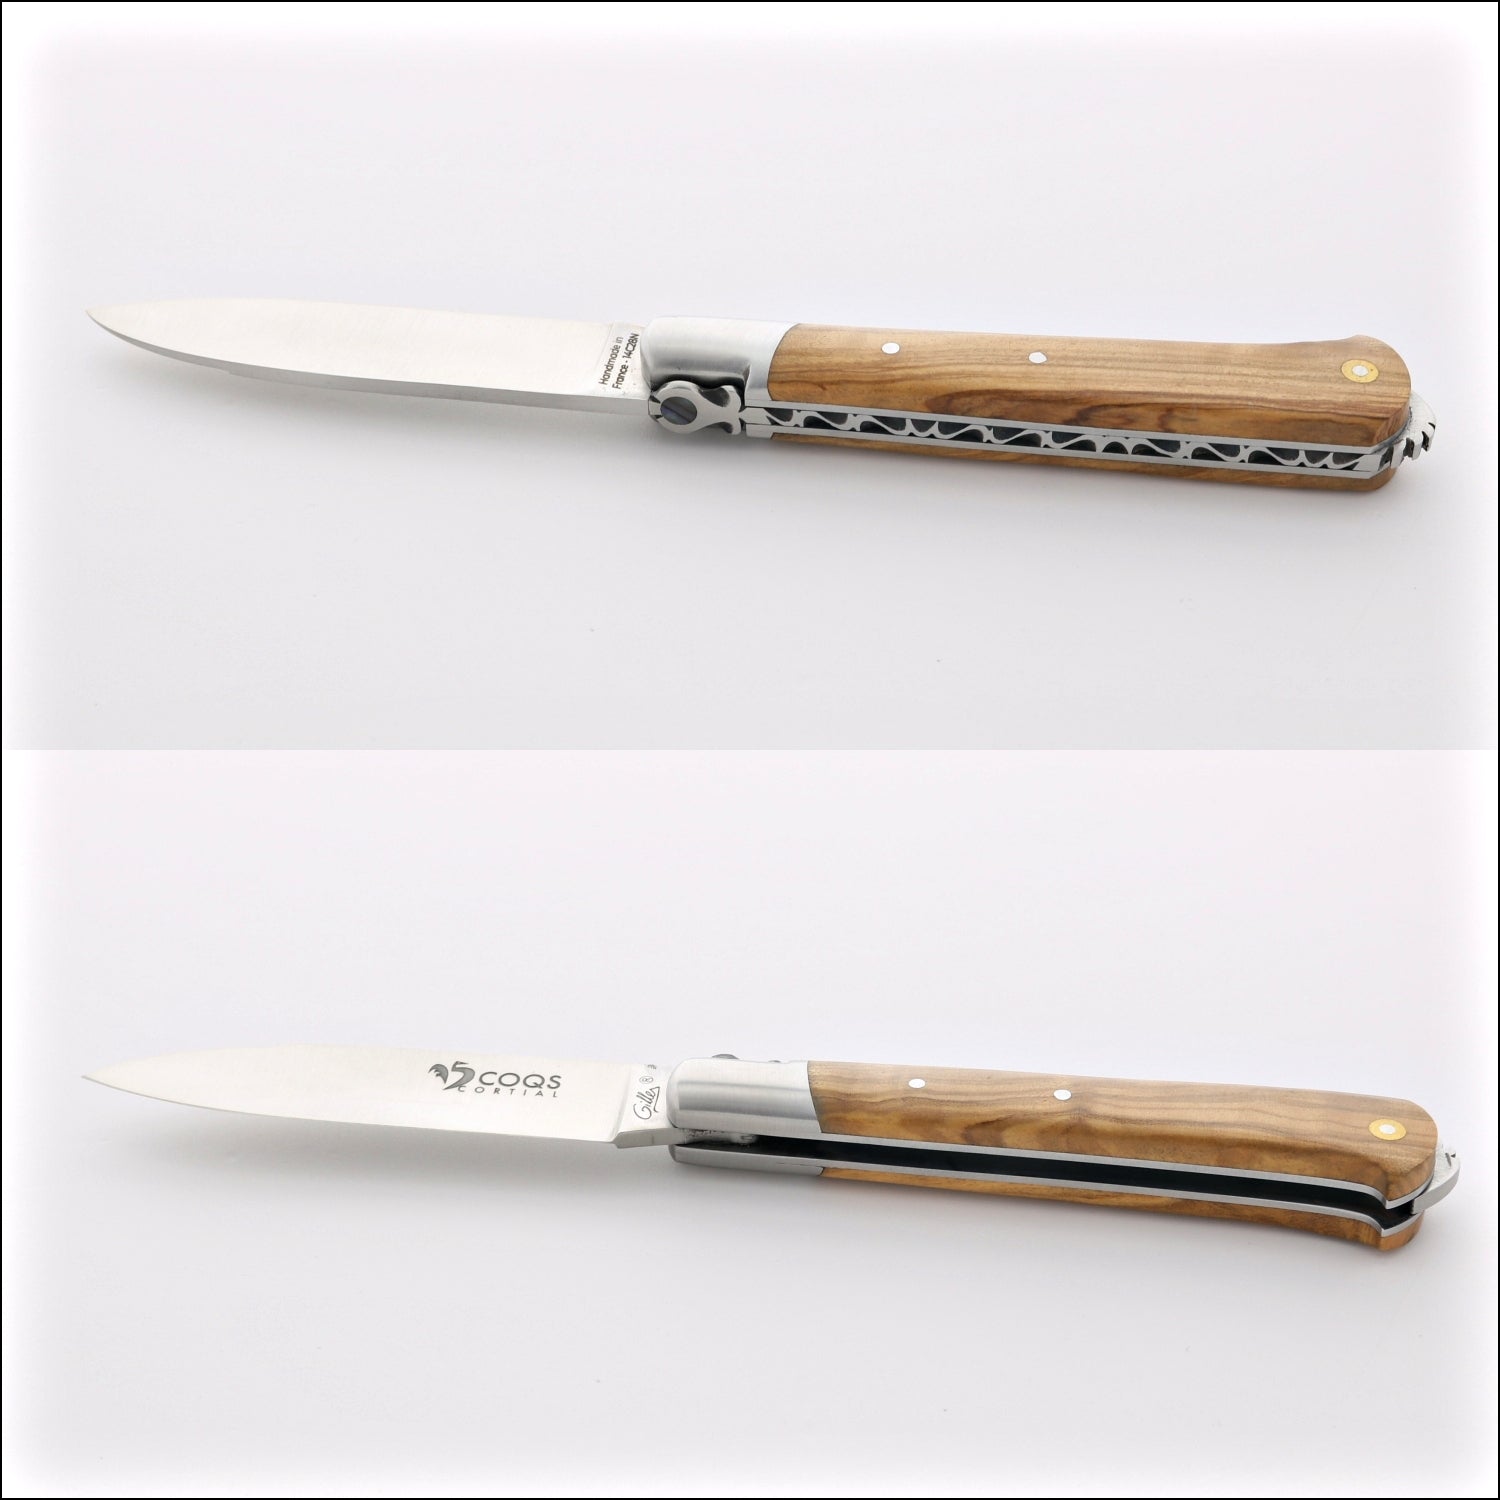 5 Coqs Pocket Knife - Olive Wood & Mother of Pearl Inlay